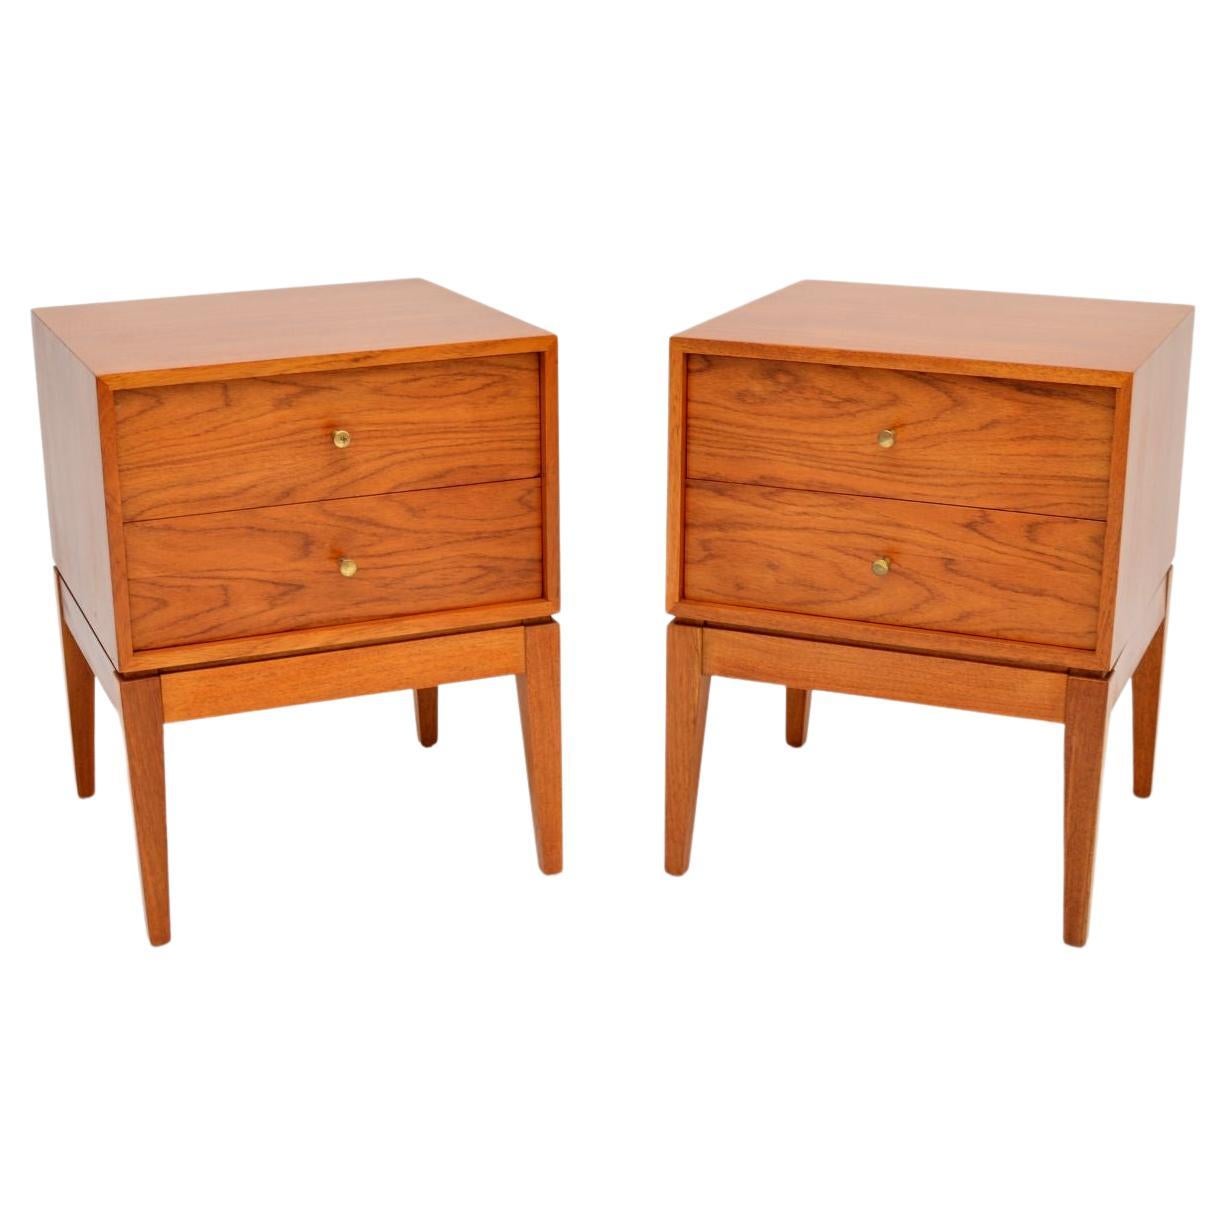 1960s Pair of Bedside Chests by Uniflex